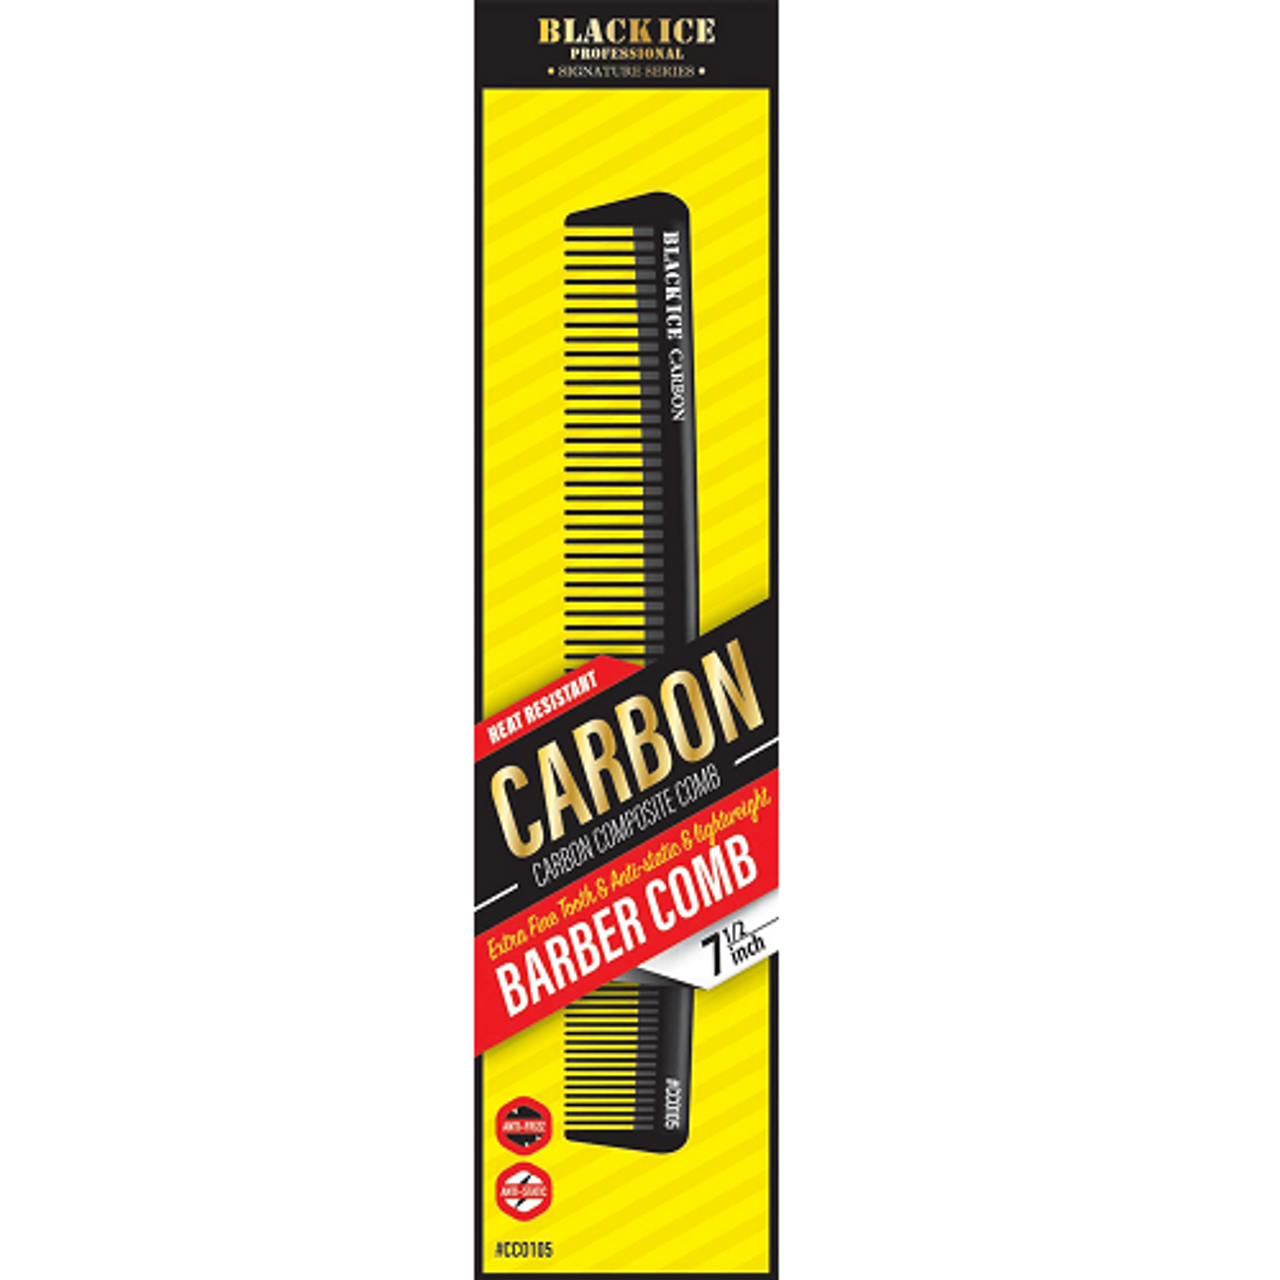 Black Ice Professional Carbon Barber Comb - 7.5in.